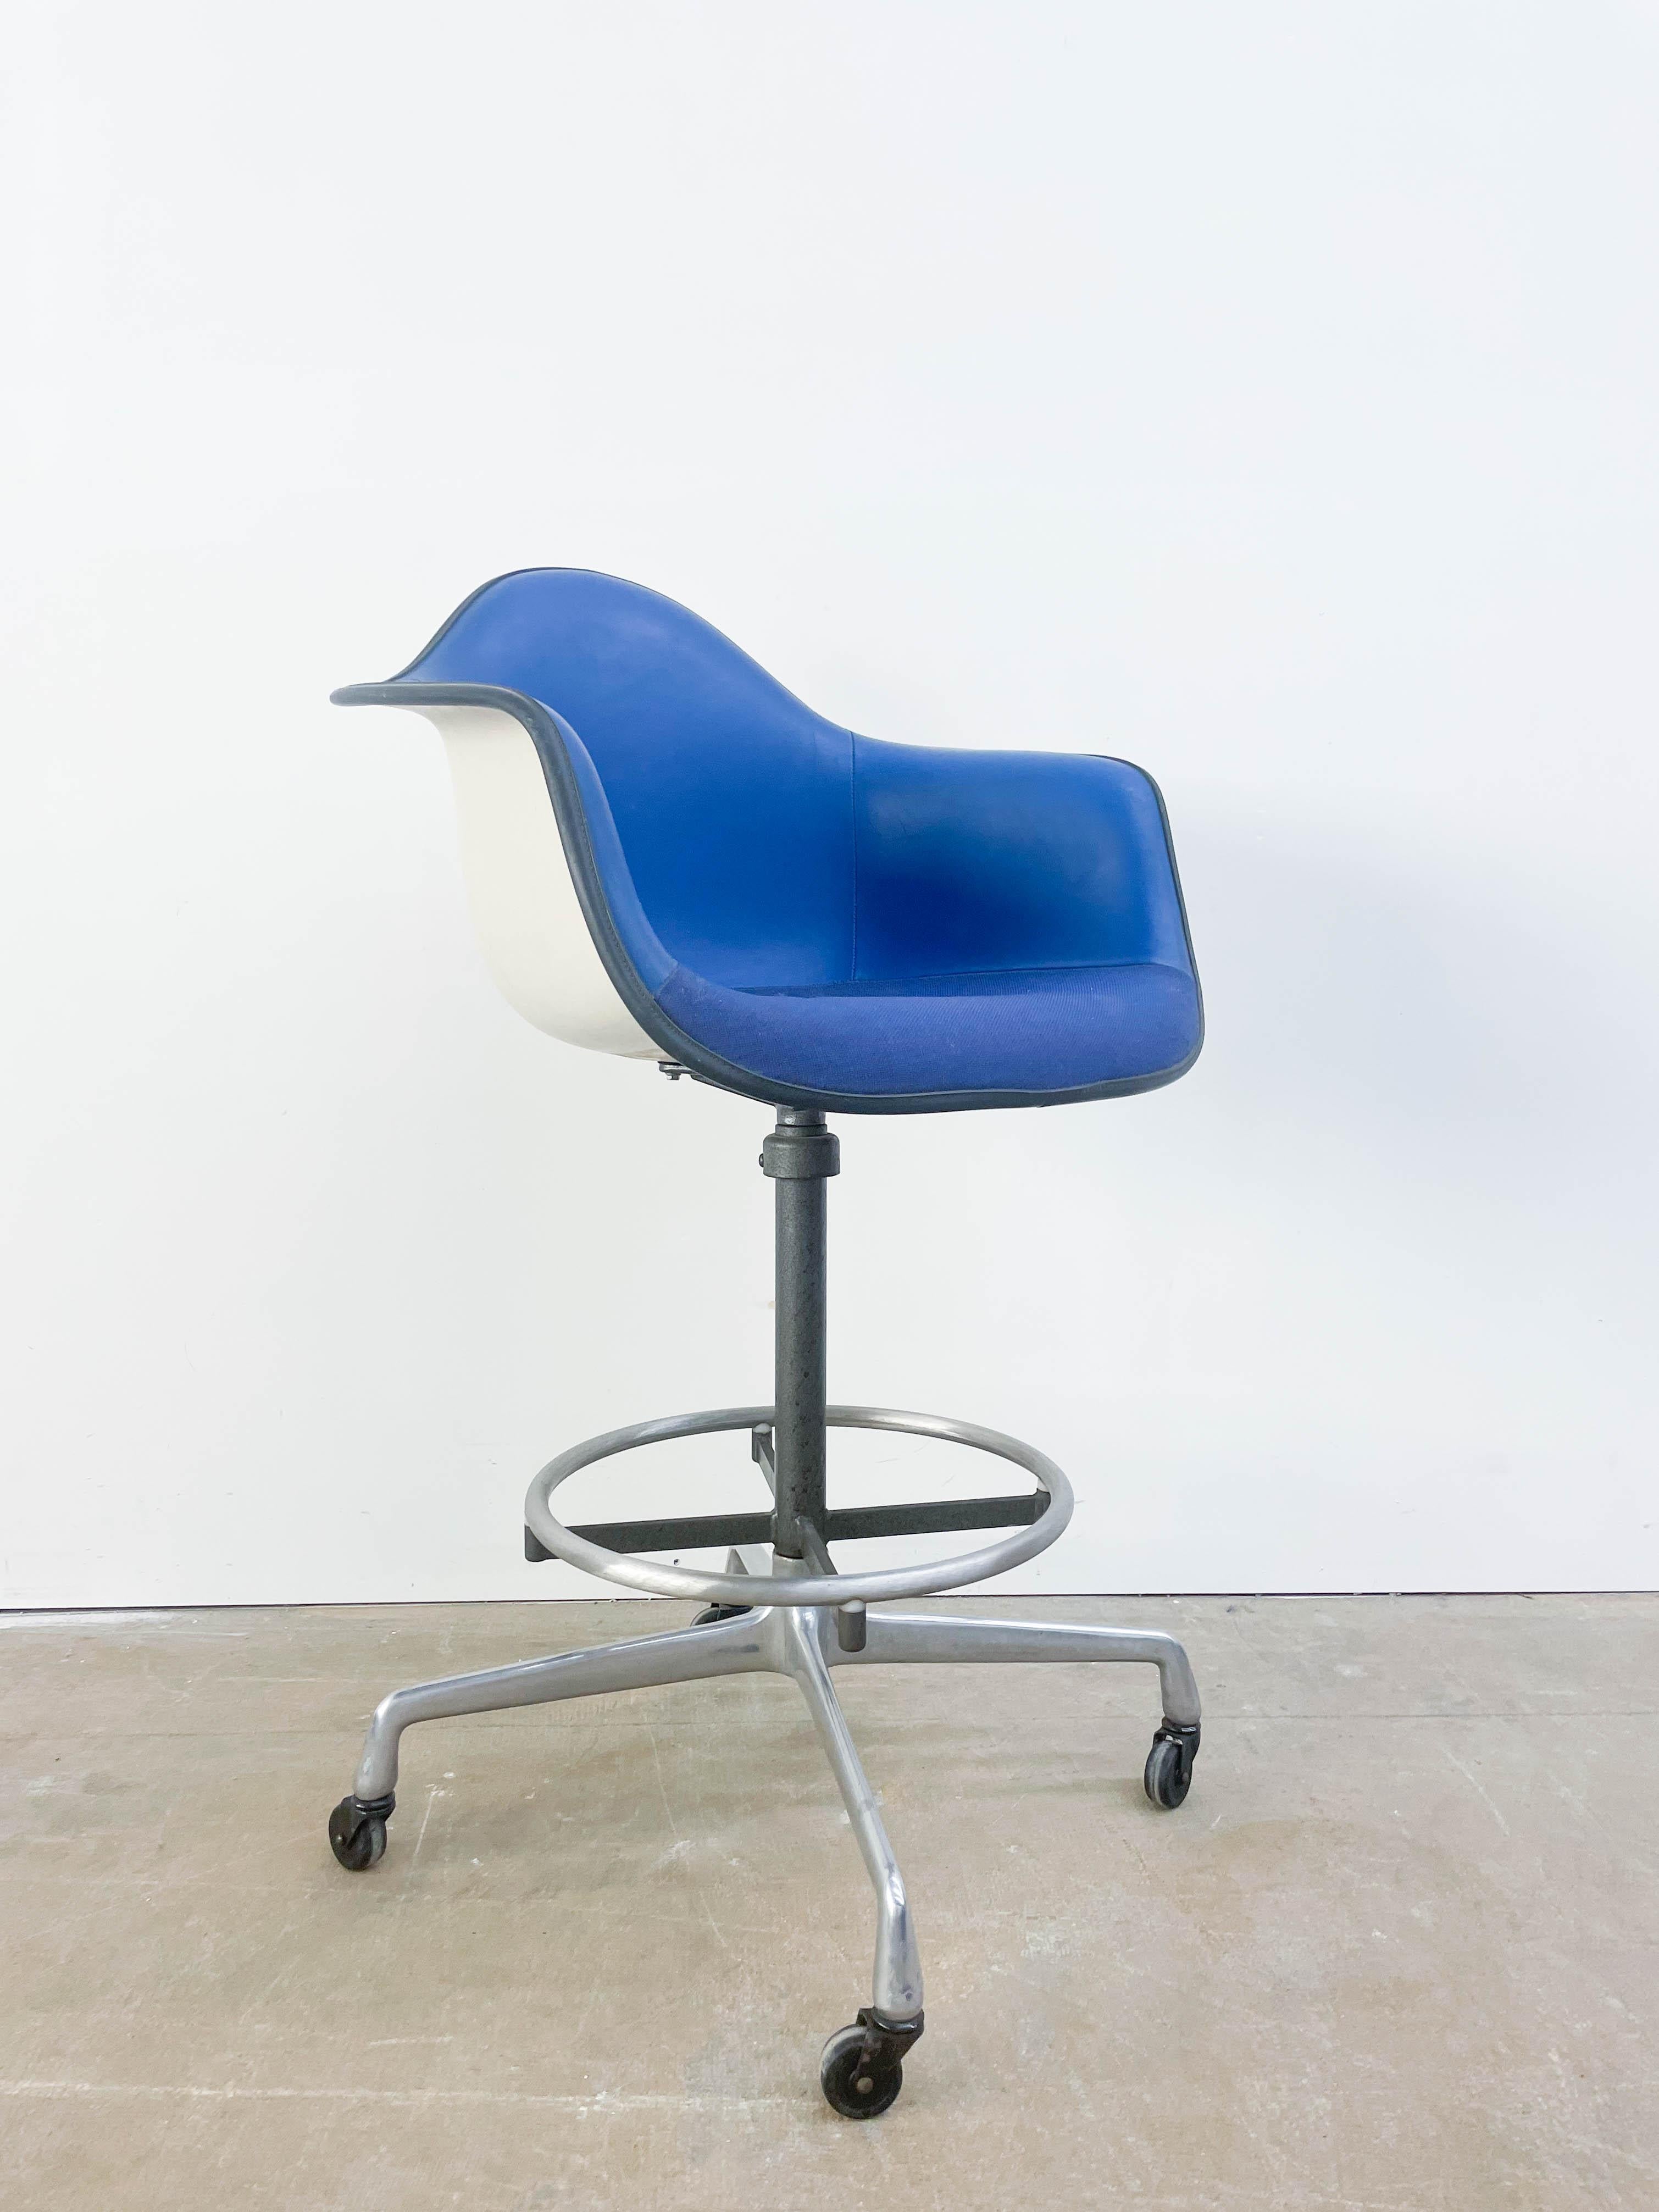 Blue upholstered Eames chair on tall designer swivel base with casters. This is an unusual and eye-catching combination that pairs comfort and functionality.
  